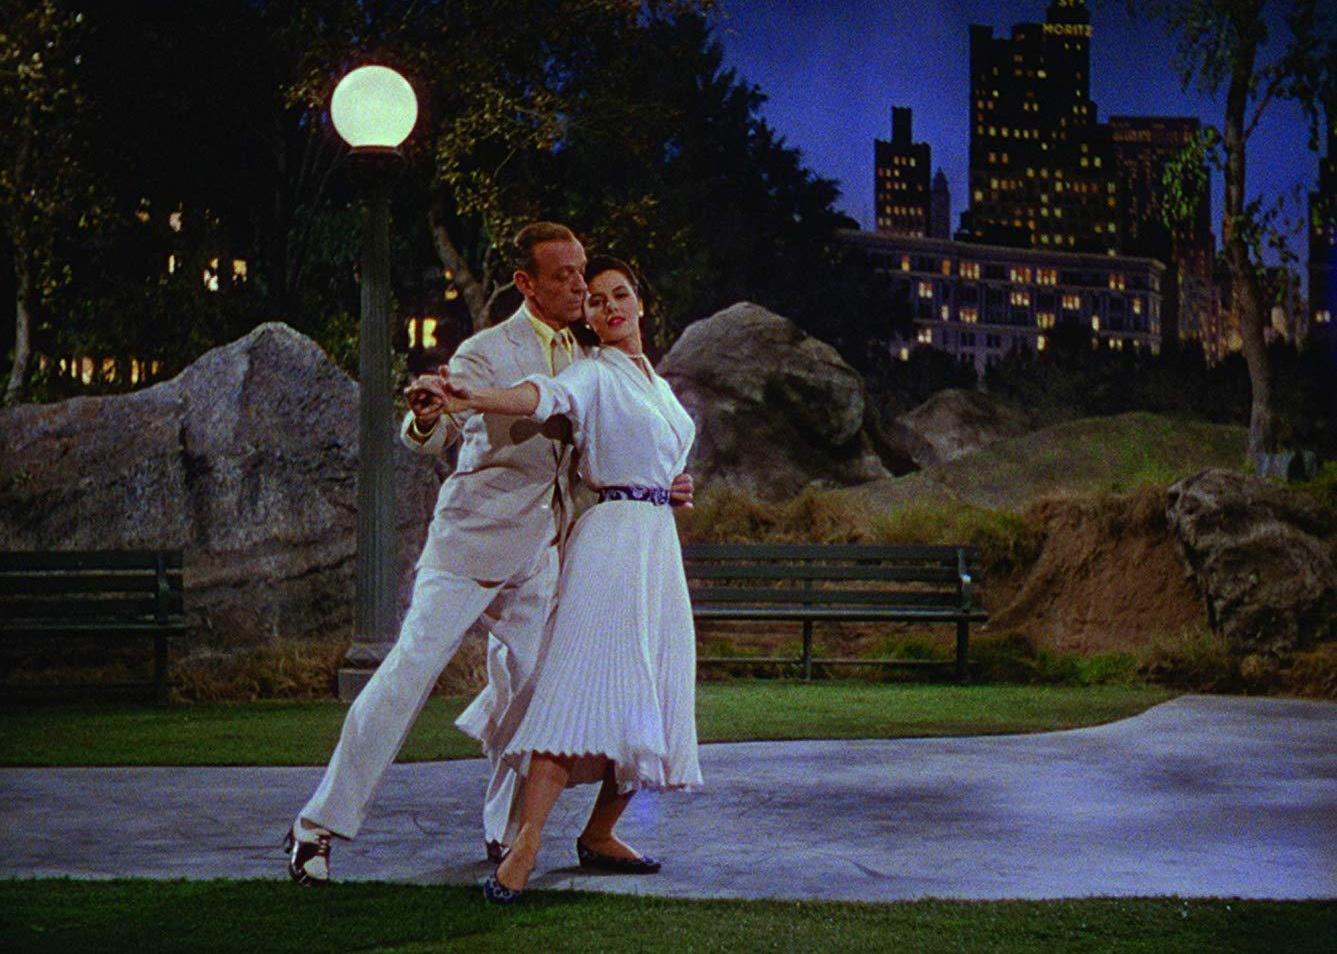 Fred Astaire dancing outside with a woman under a streetlight.